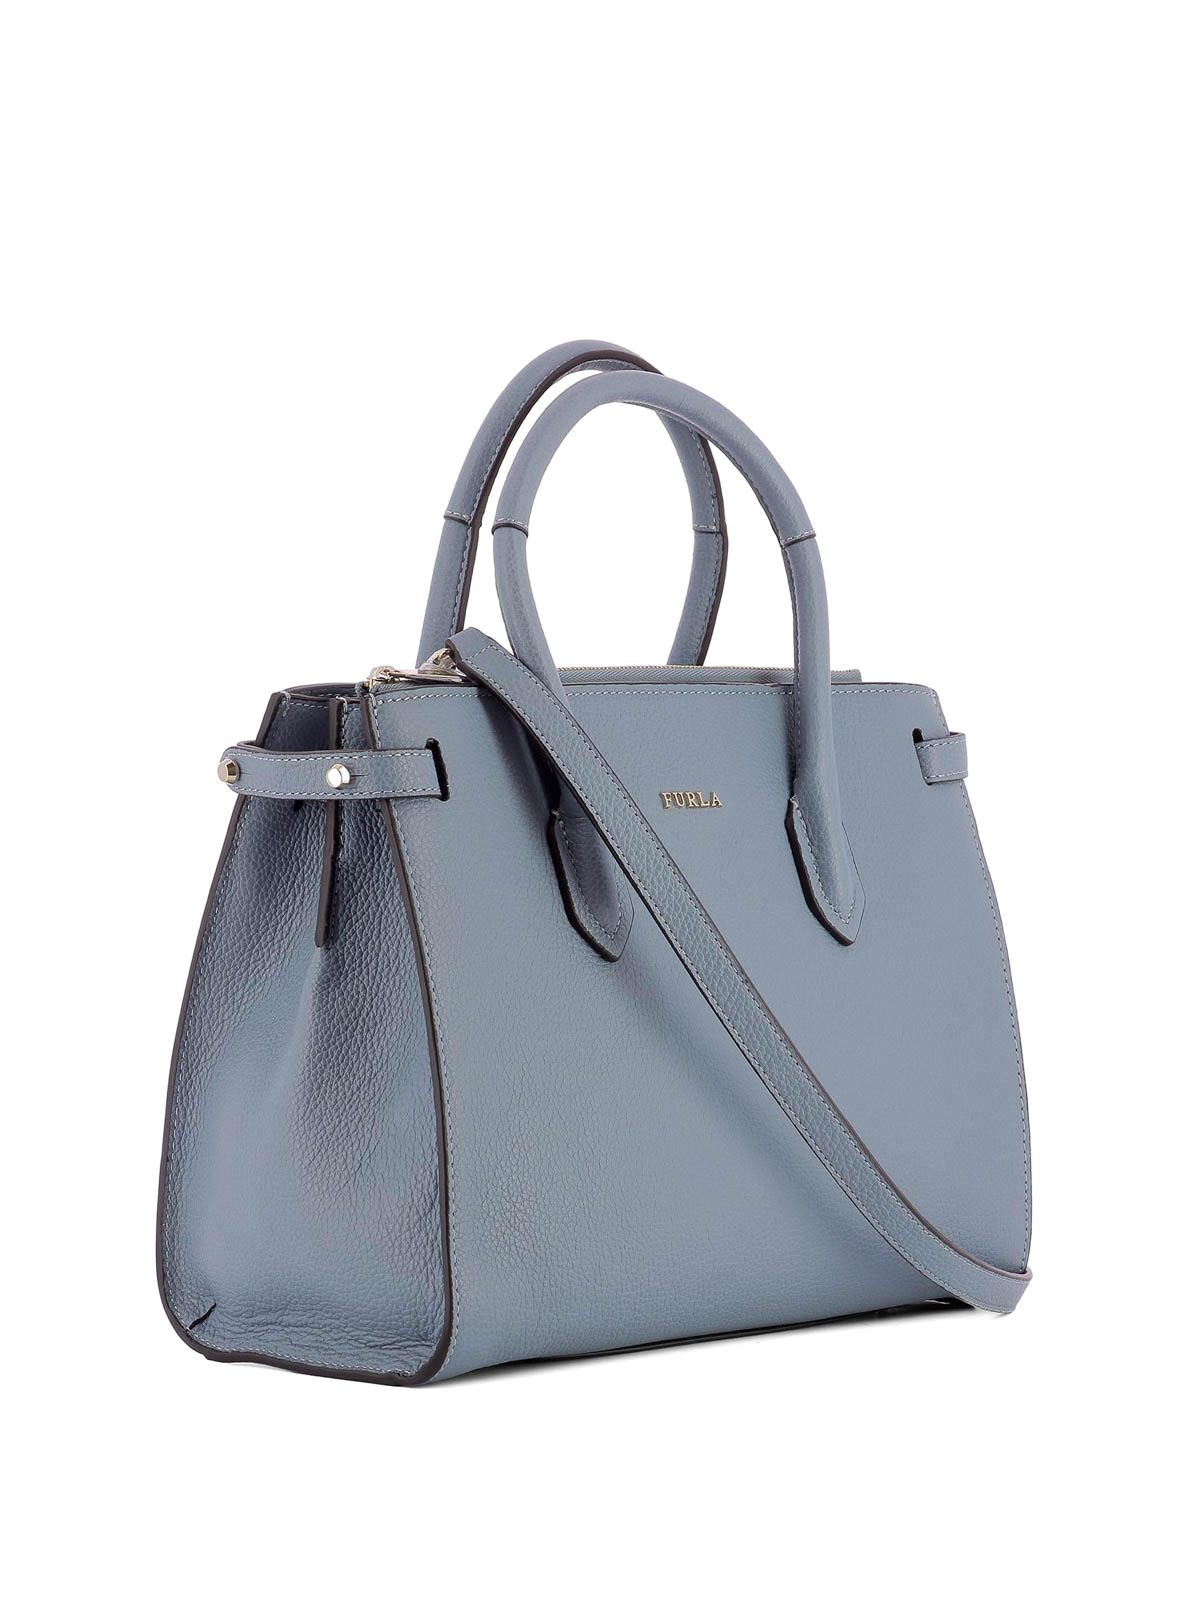 Totes bags Furla - Pin light blue leather small tote - 904135